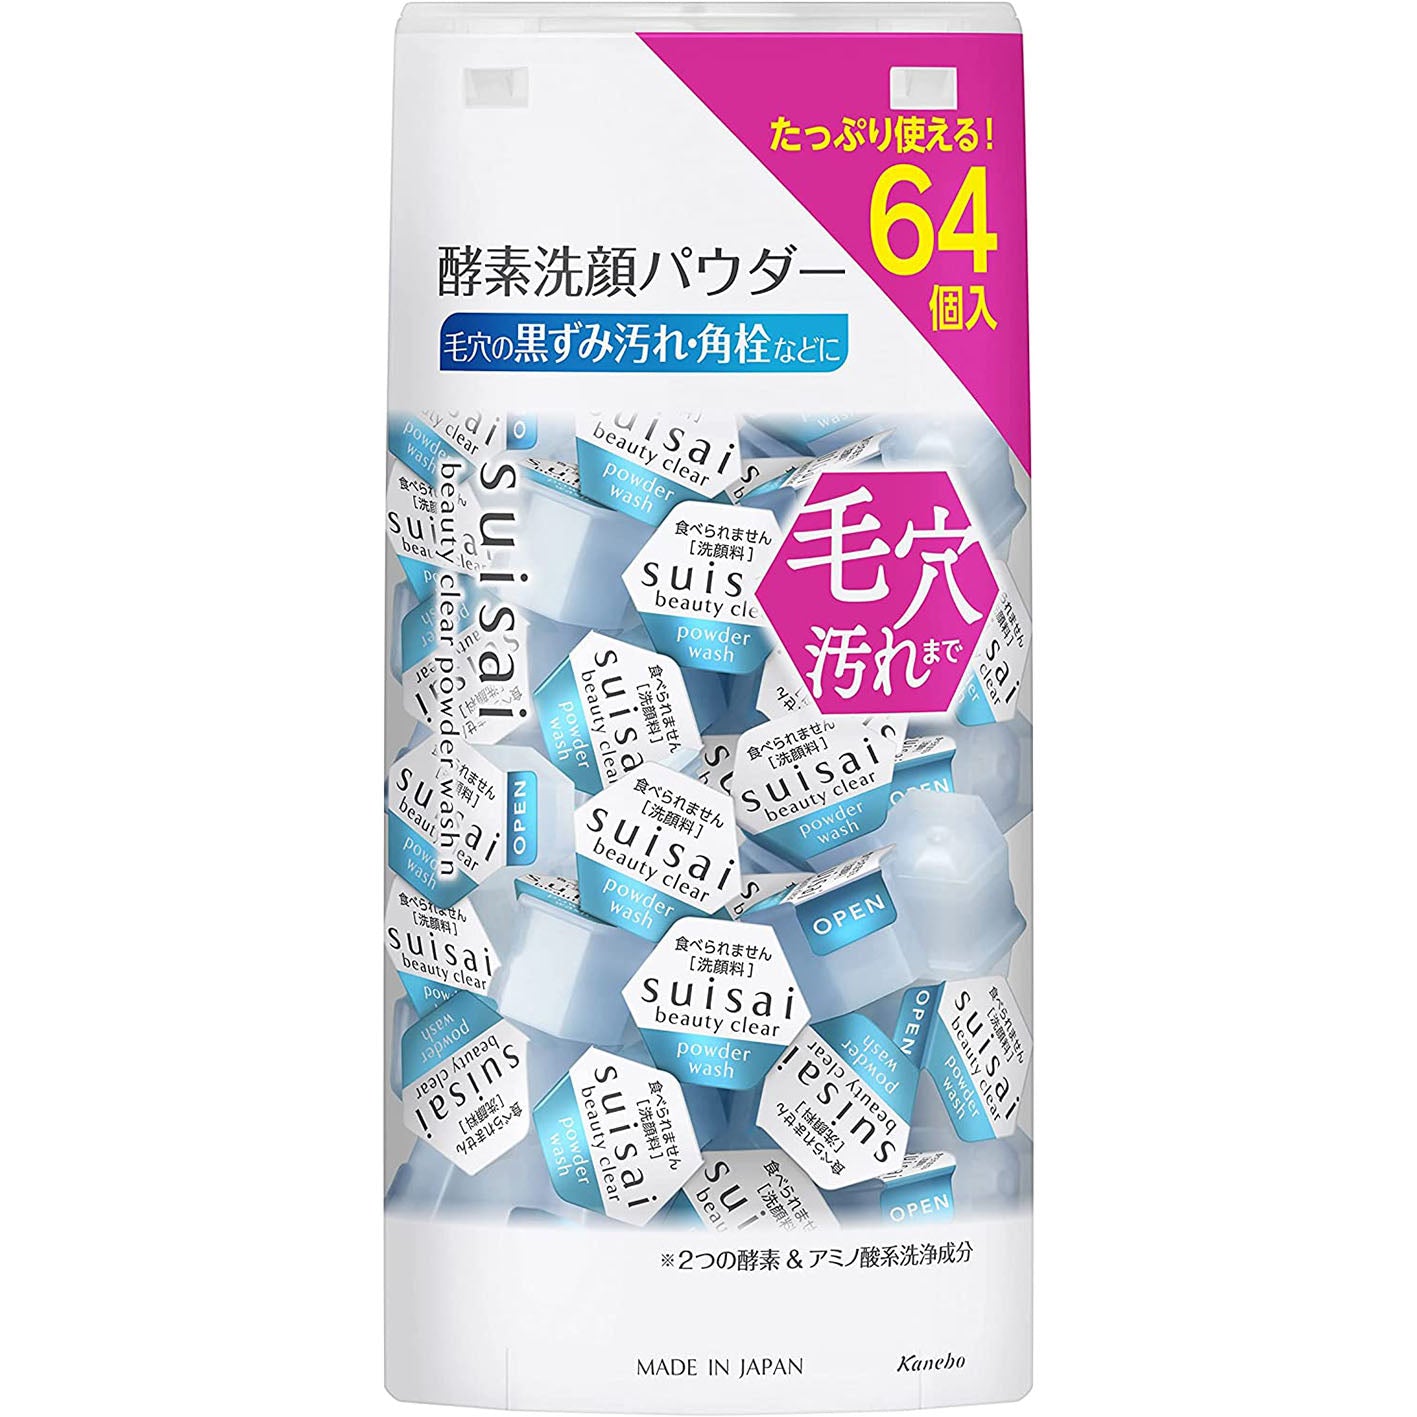 Kanebo Suisai Beauty Clear Powder 0.4g - 64pieces - Harajuku Culture Japan - Japanease Products Store Beauty and Stationery